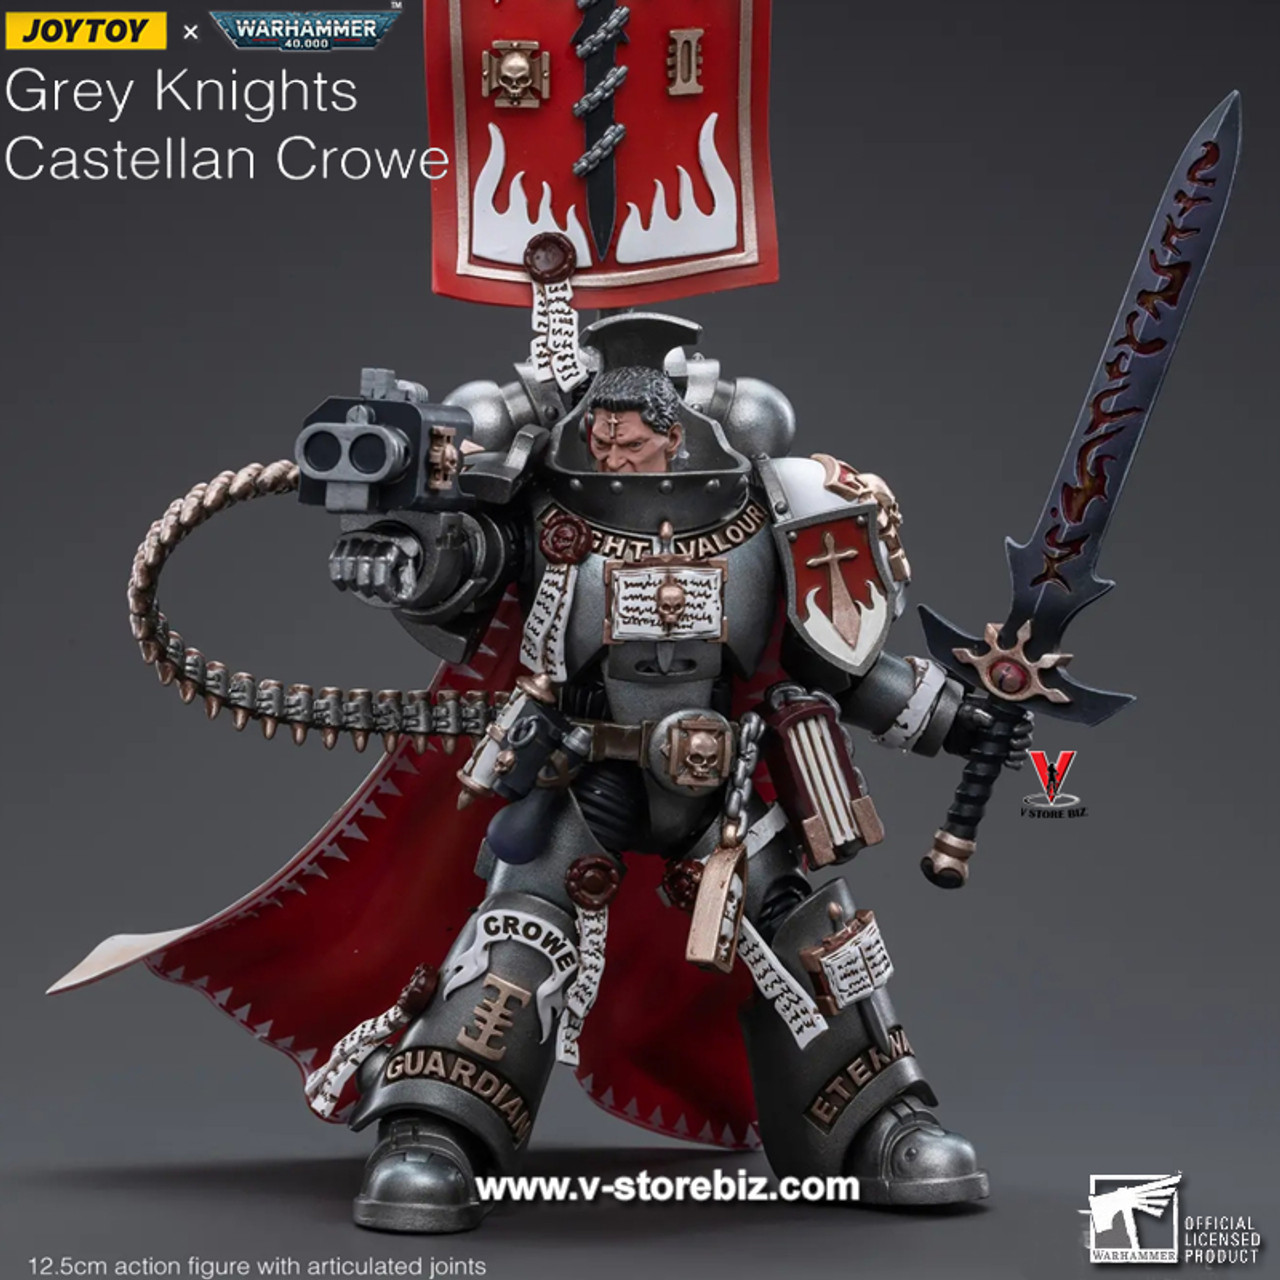 Sold Out Joytoy Warhammer 40k Jt3518 Grey Knights Castellan Crowe V Store Collectibles 2525